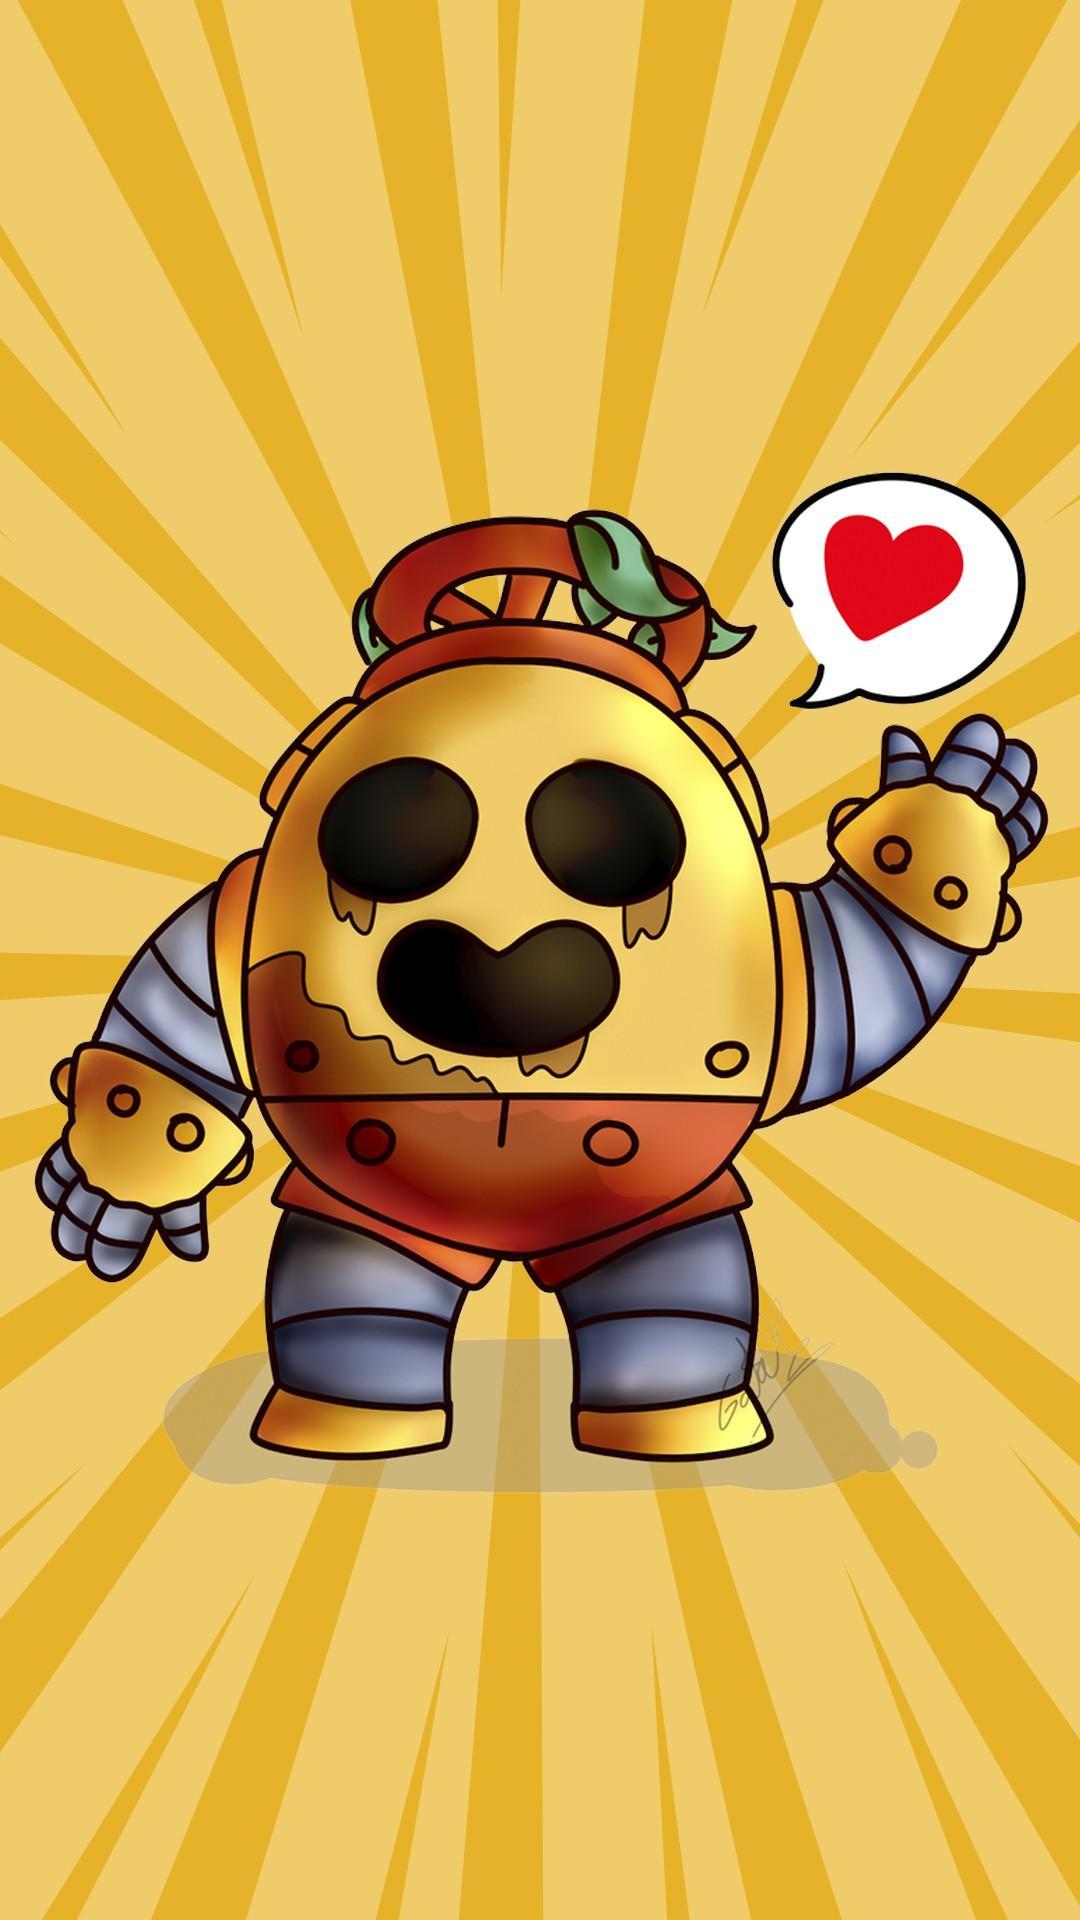 Brawl Stars Wallpapers For Android Apk Download - brawl stars achtergrond mortis